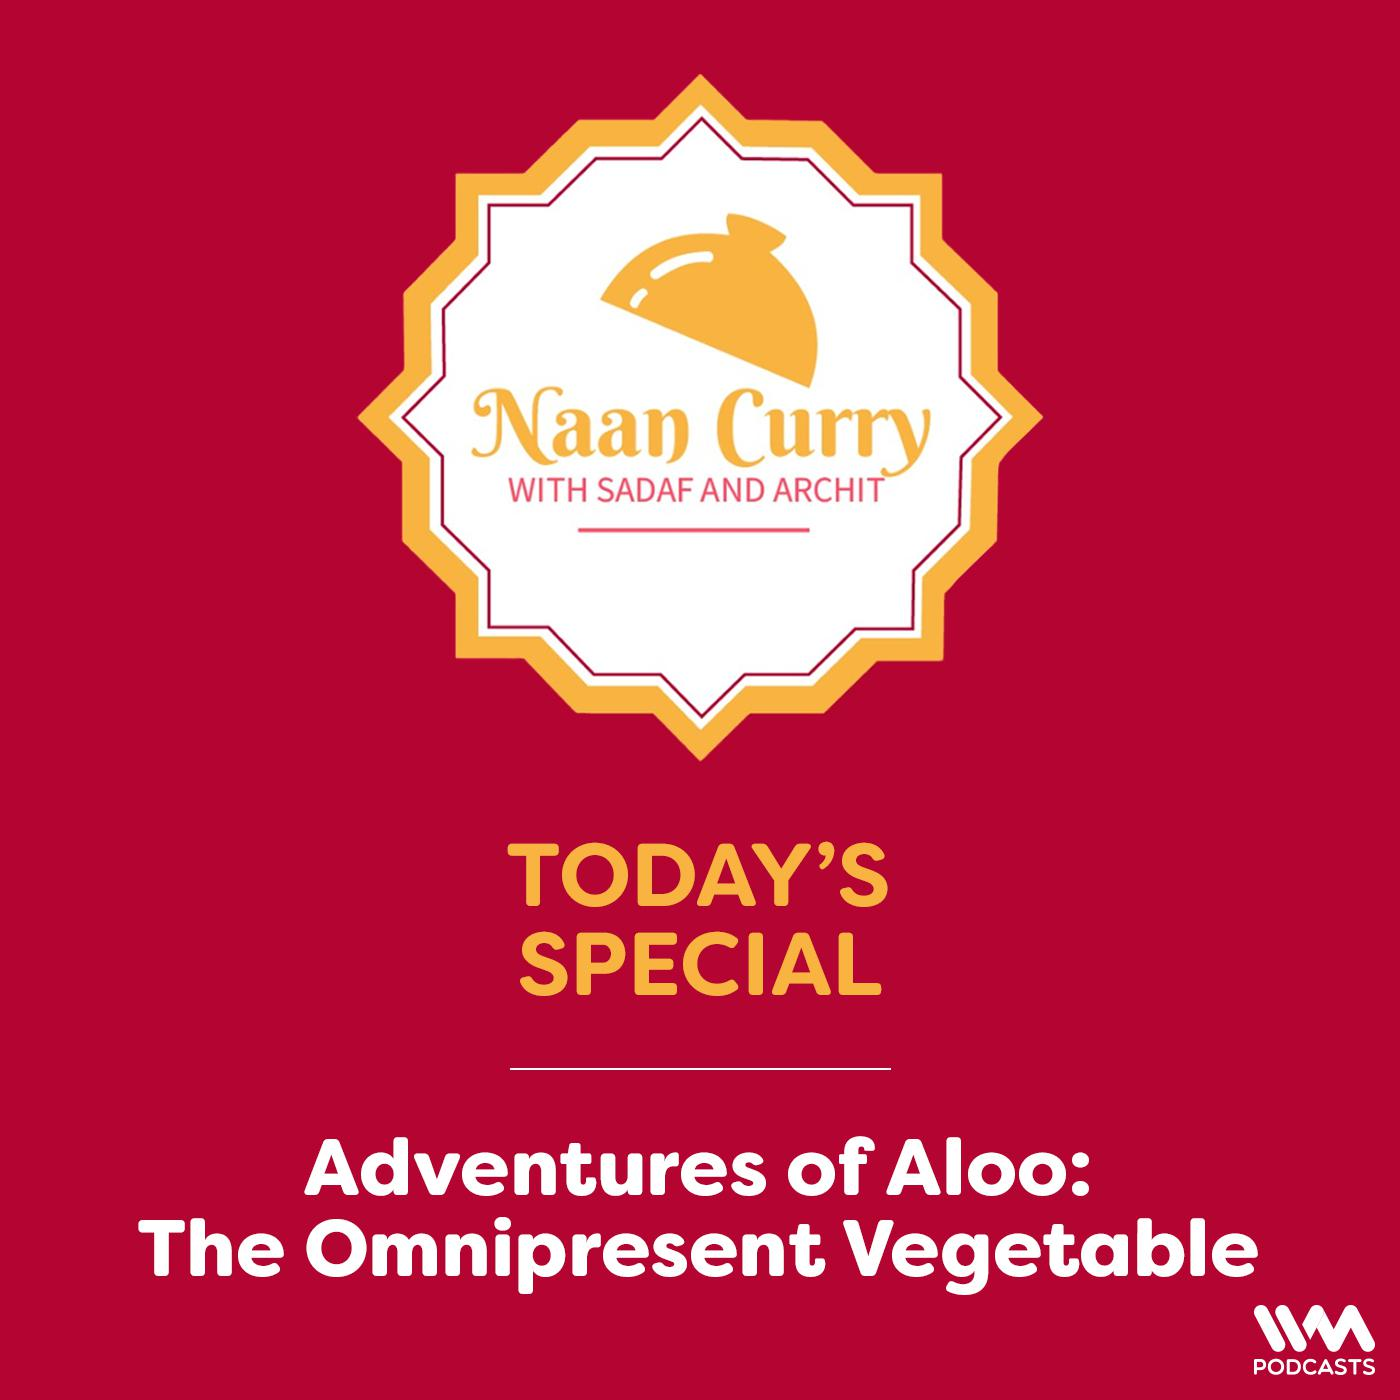 Adventures of Aloo: The Omnipresent Vegetable